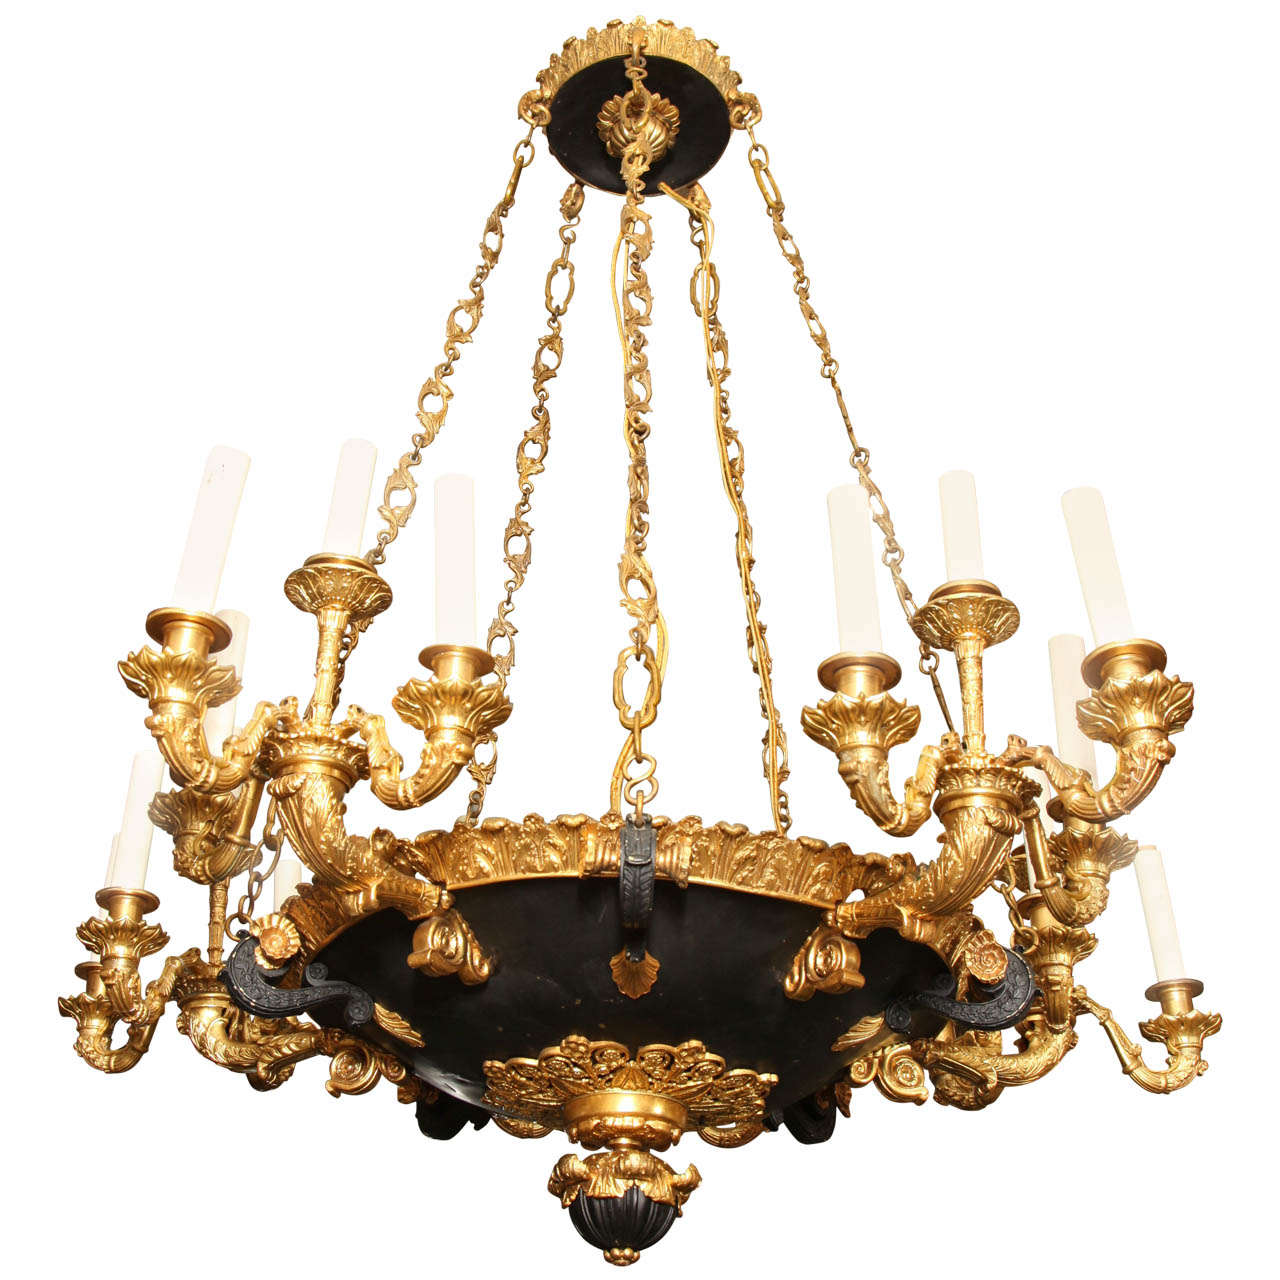 A Very Large 19th Century French Empire Style Twenty Light Chandelier